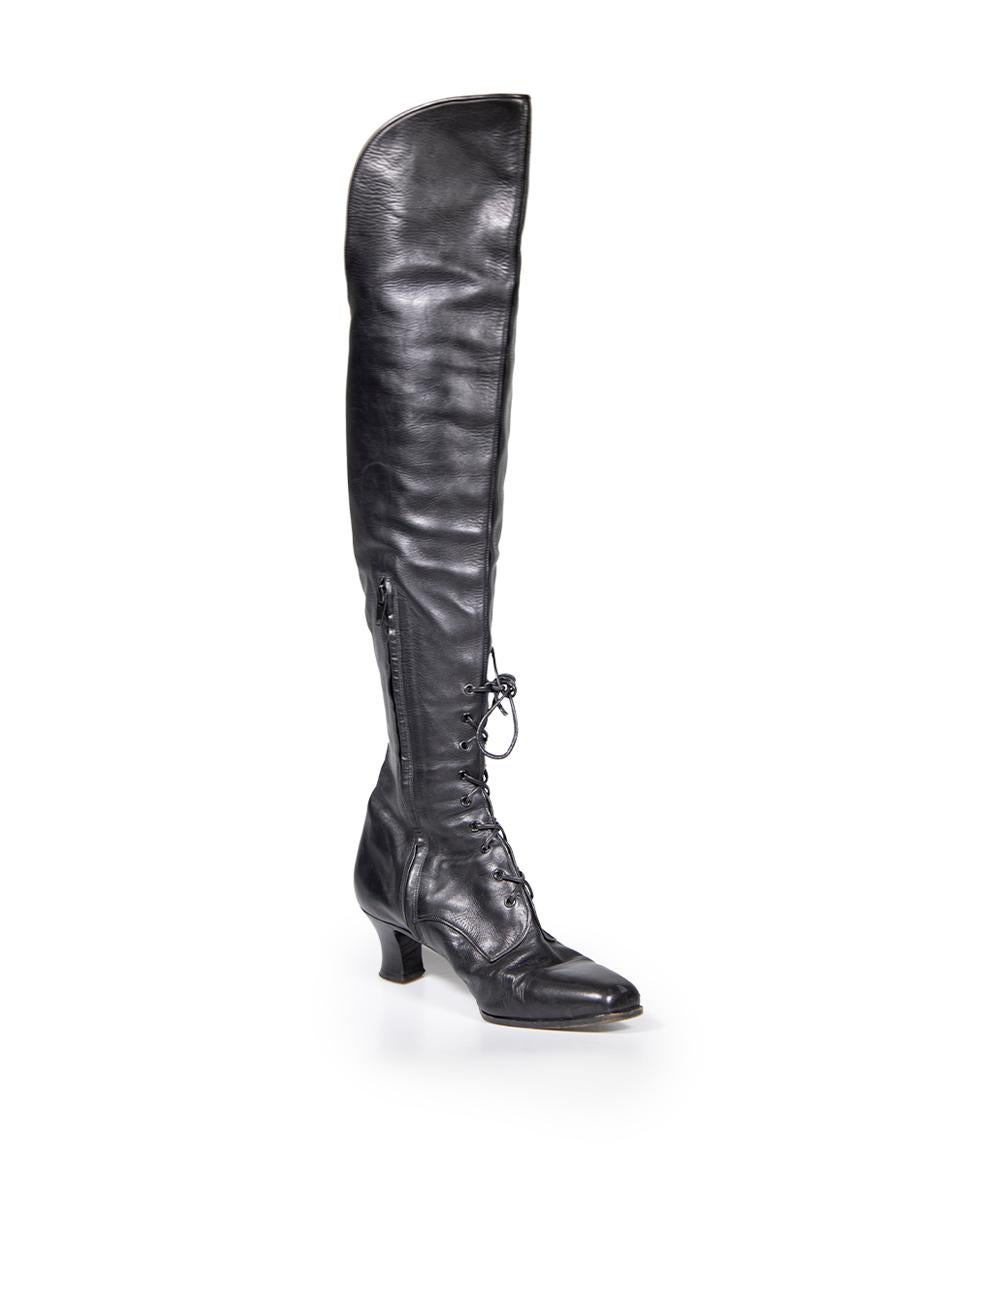 CONDITION is Very good. Minimal wear to boots is evident. There is wear to soles and some small abrasions to the leather sides and toe edge on this used Christian Dior Boutique designer resale item.
 
 Details
 Black
 Leather
 Over the knee boots
